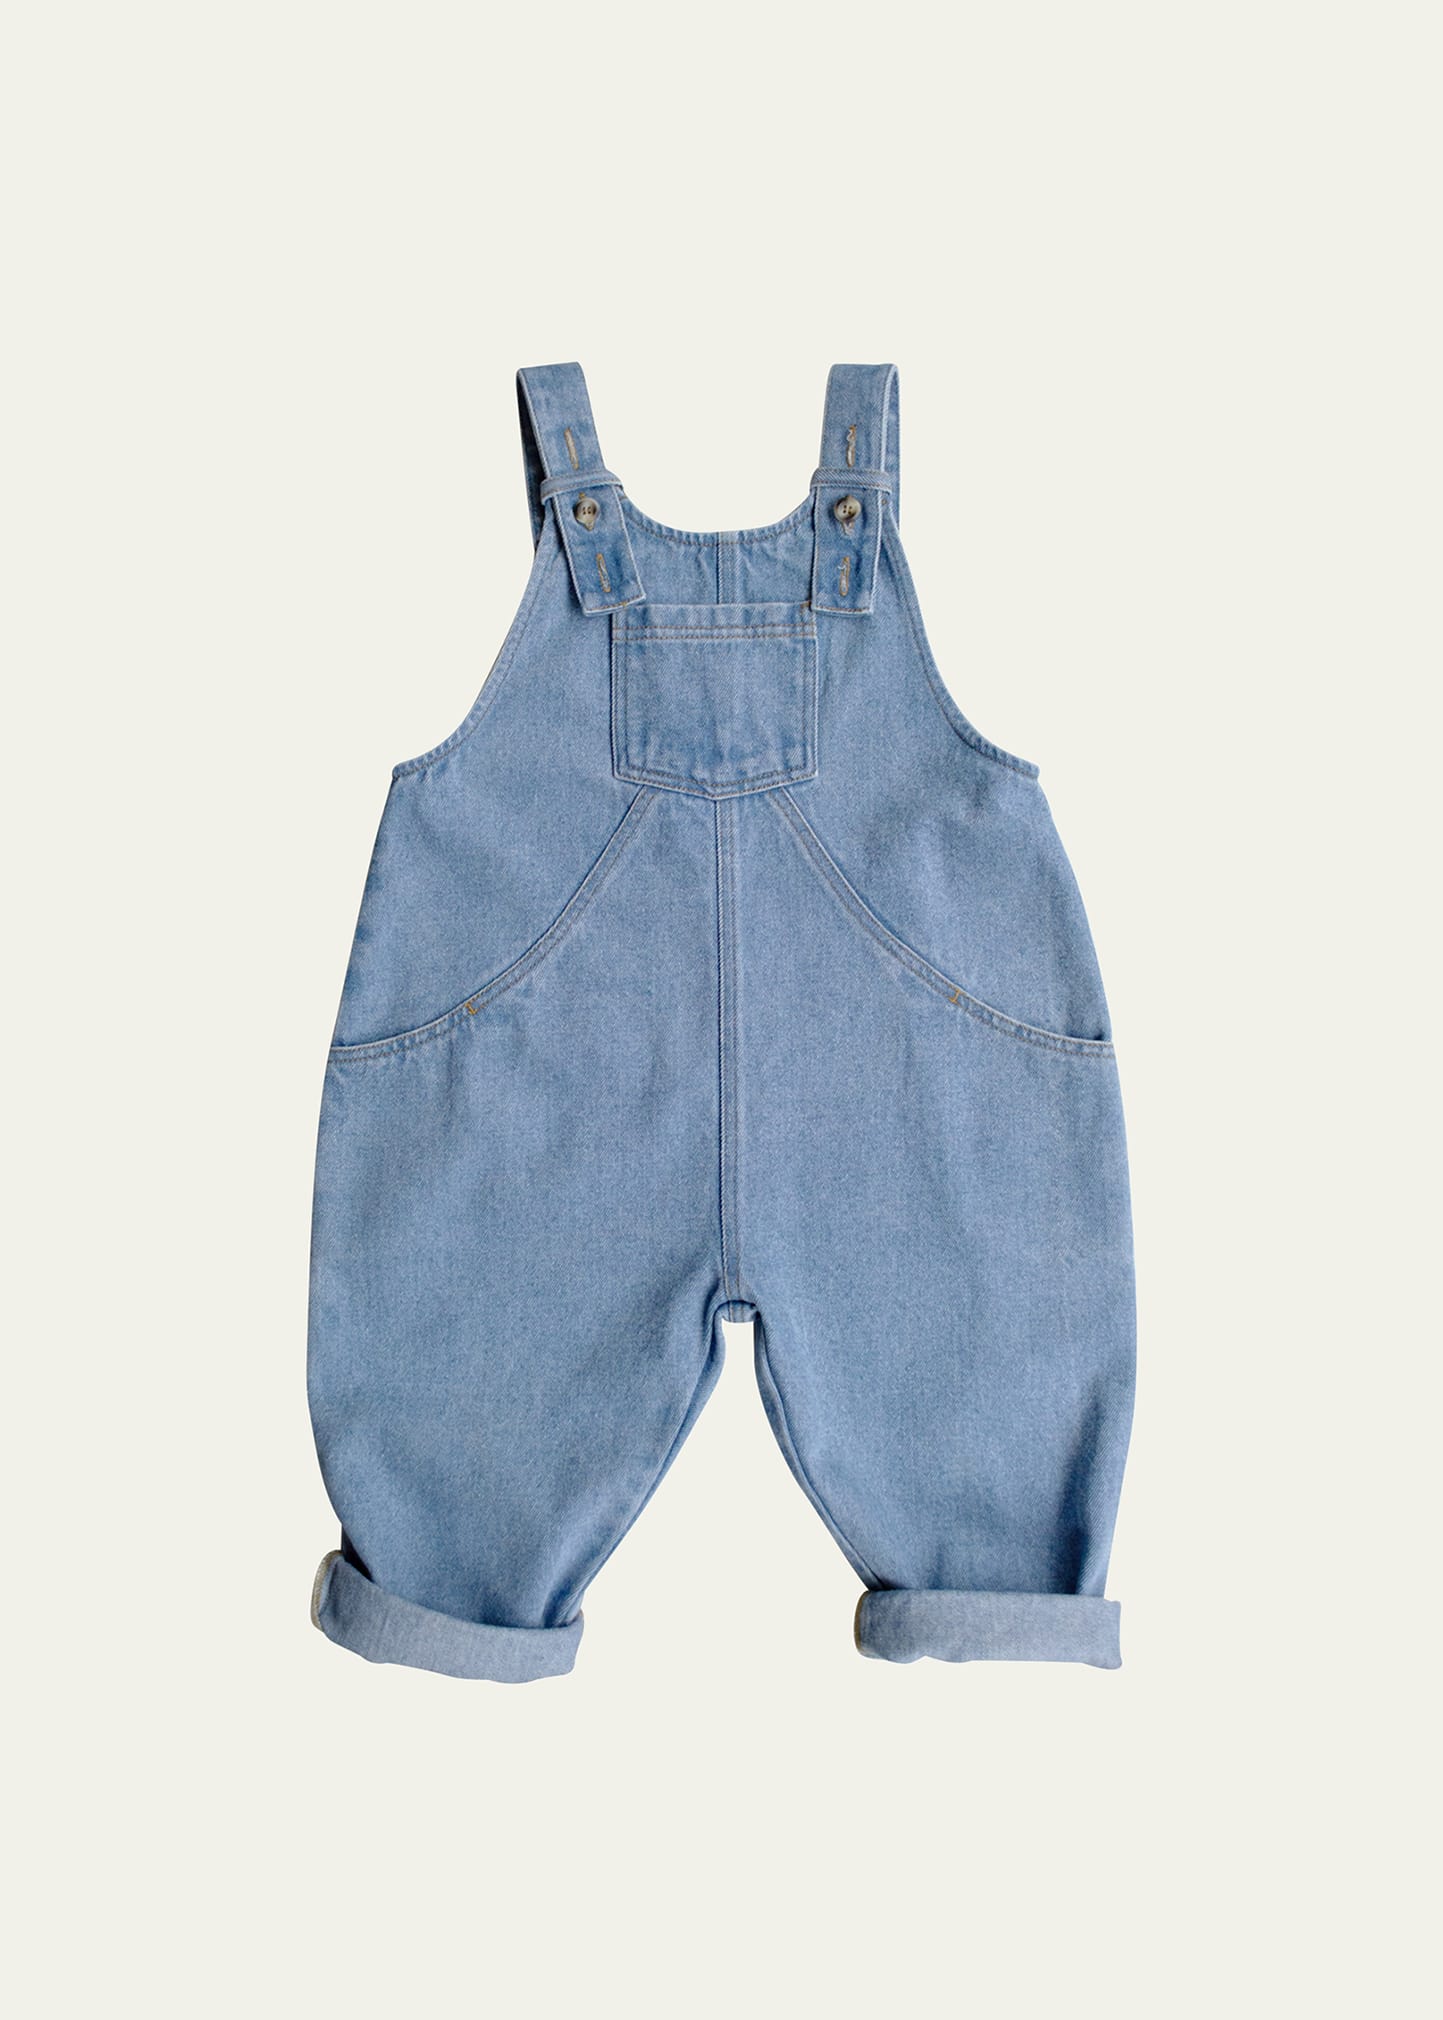 Kid's The Oversized Denim Dungaree Overalls, Size 3-10